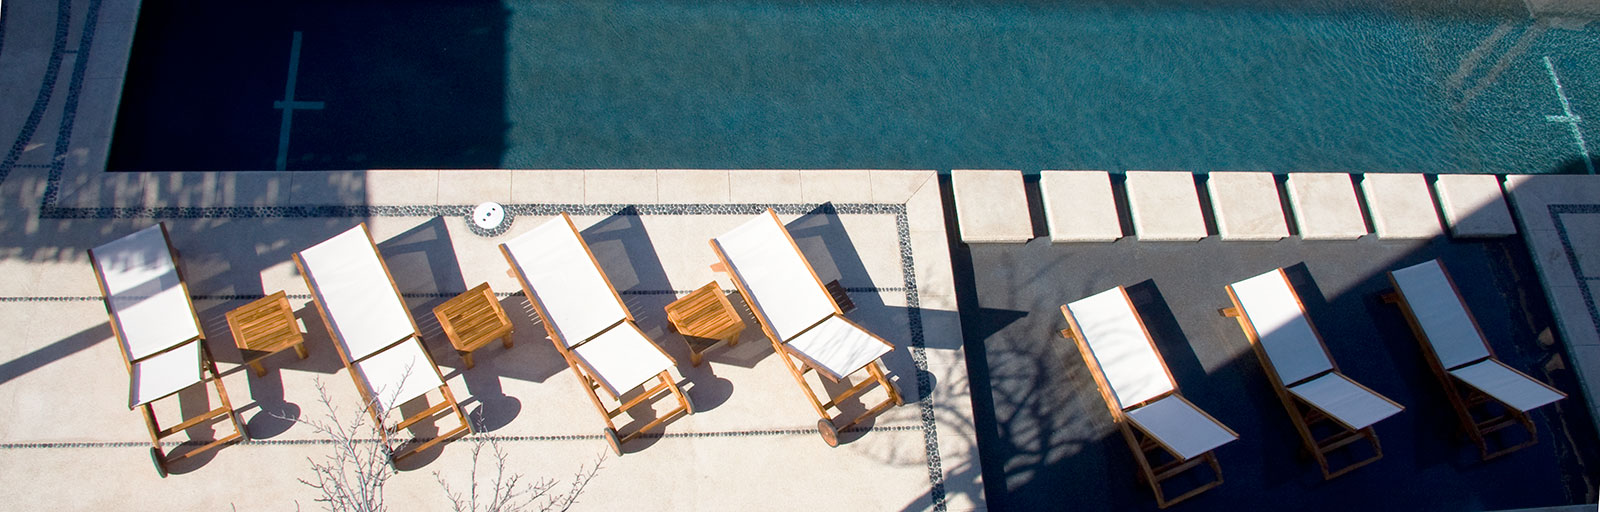 Yoga & Wellness Retreats in Mexico: Chaise Lounges at the Swimming Pool